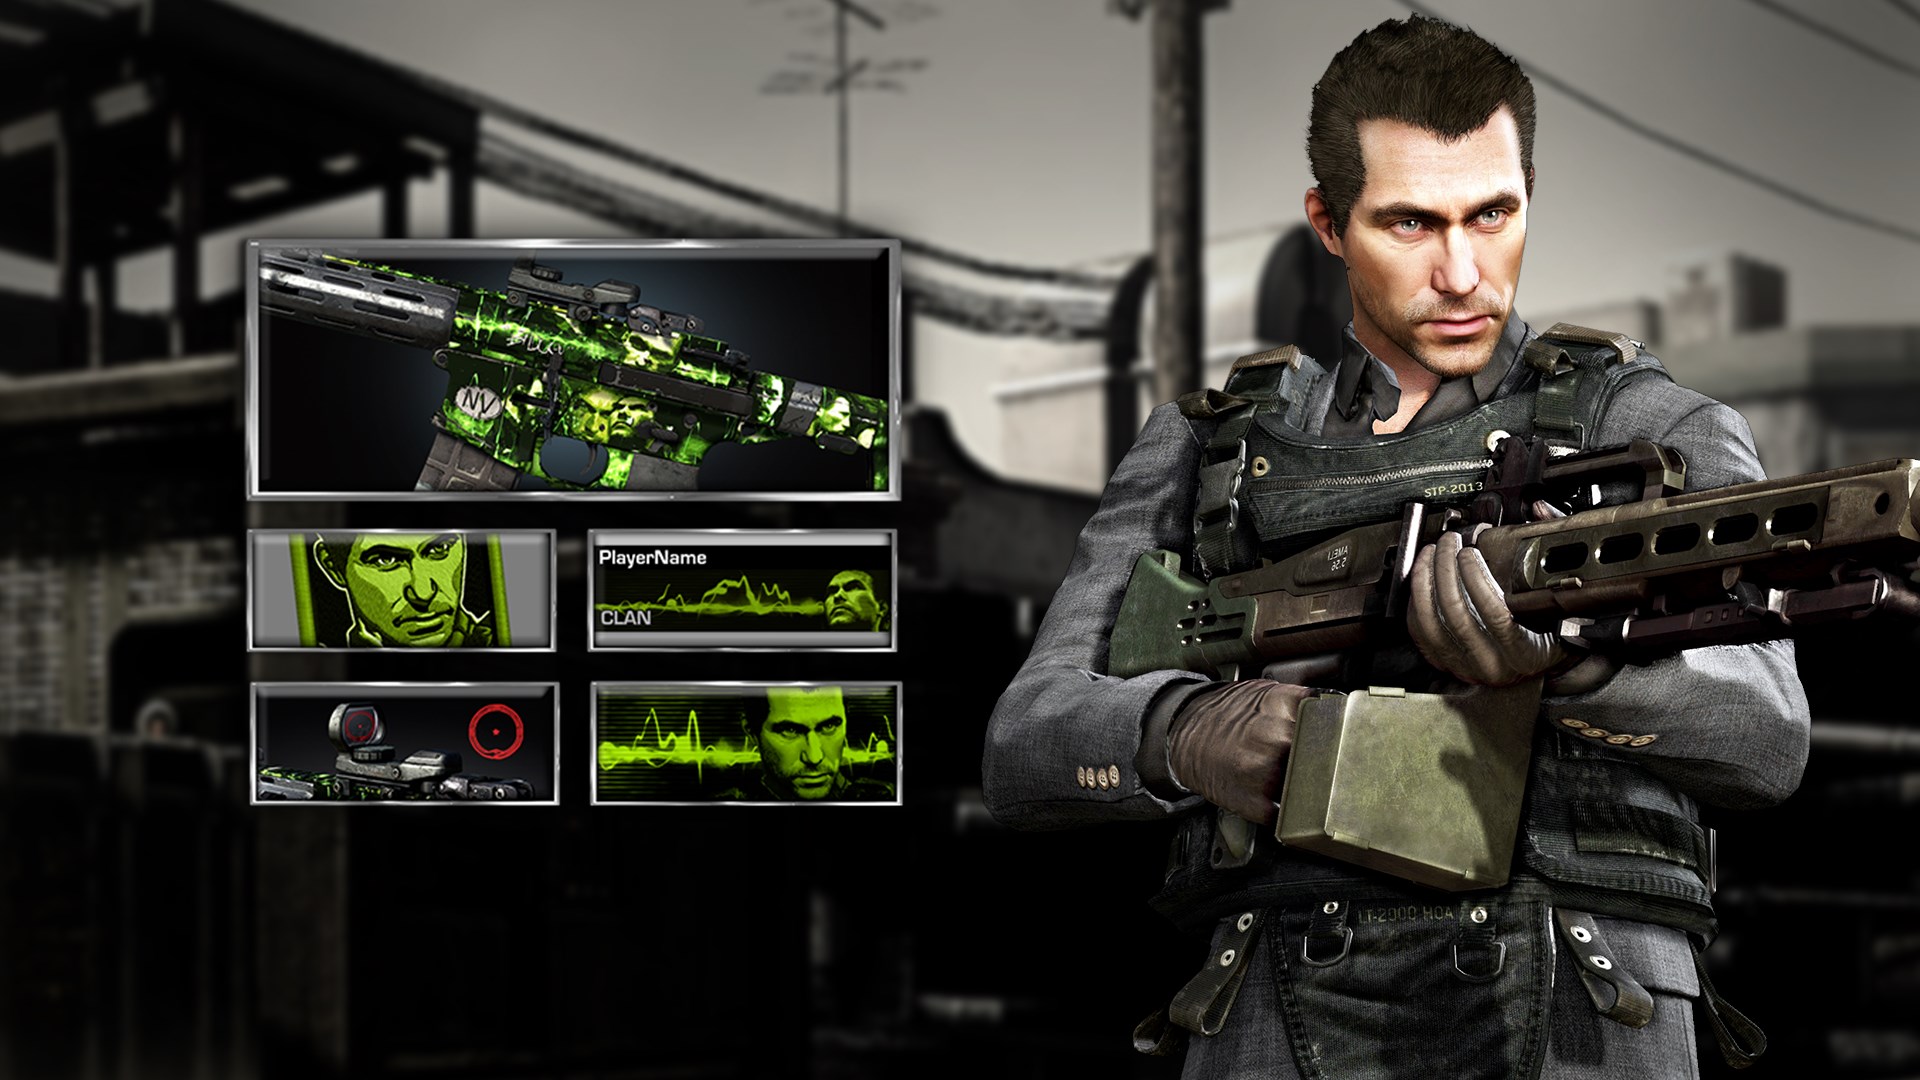 Call of Duty®: Ghosts - Weapon - The Ripper